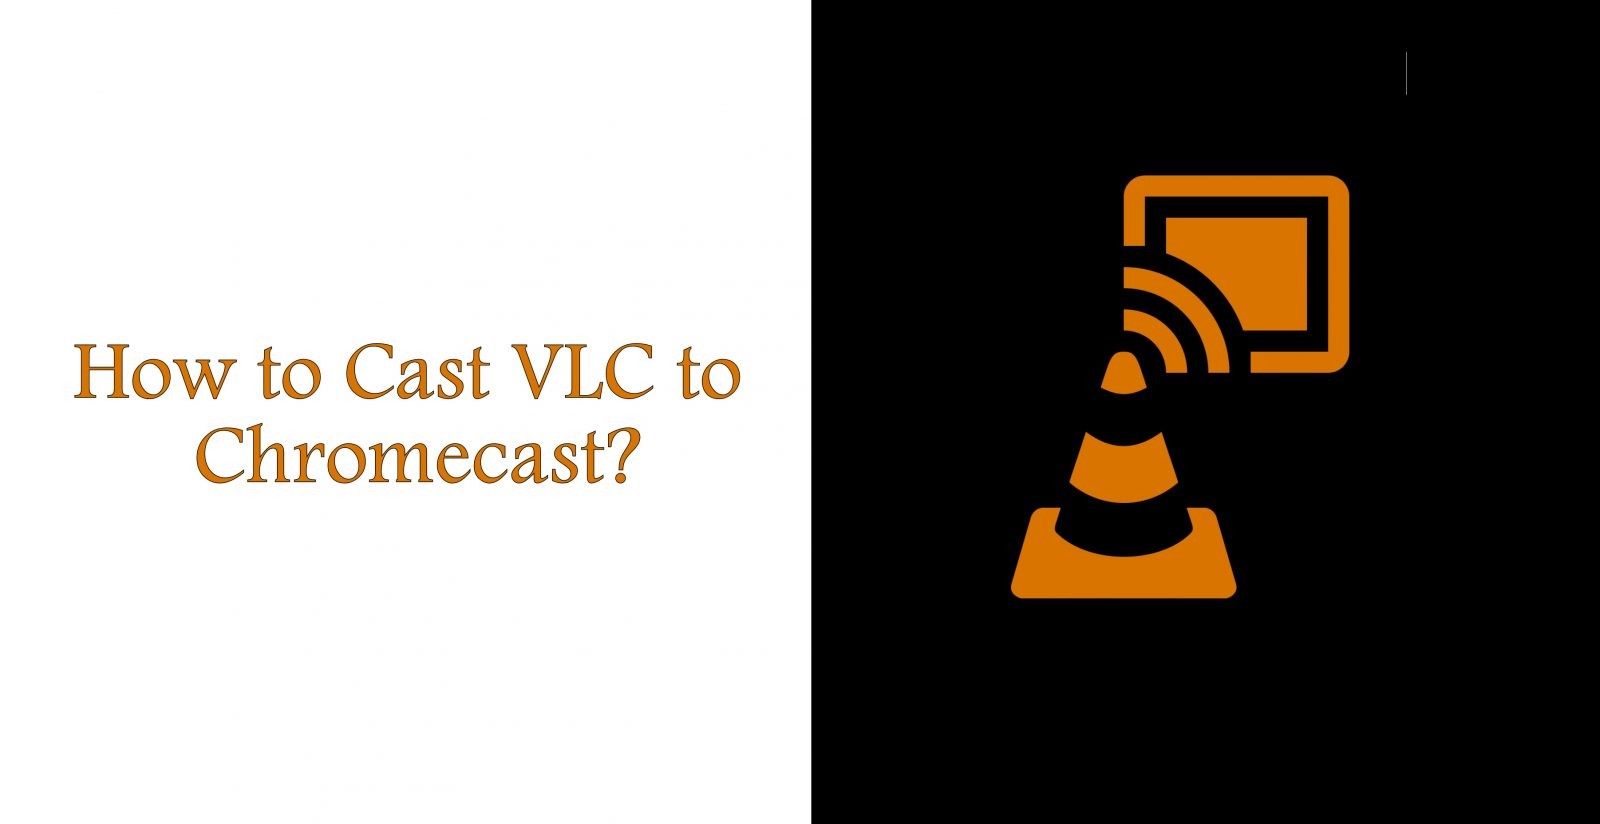 Sorg sendt voldsom How to Cast VLC on Chromecast Connected TV - Tech Follows